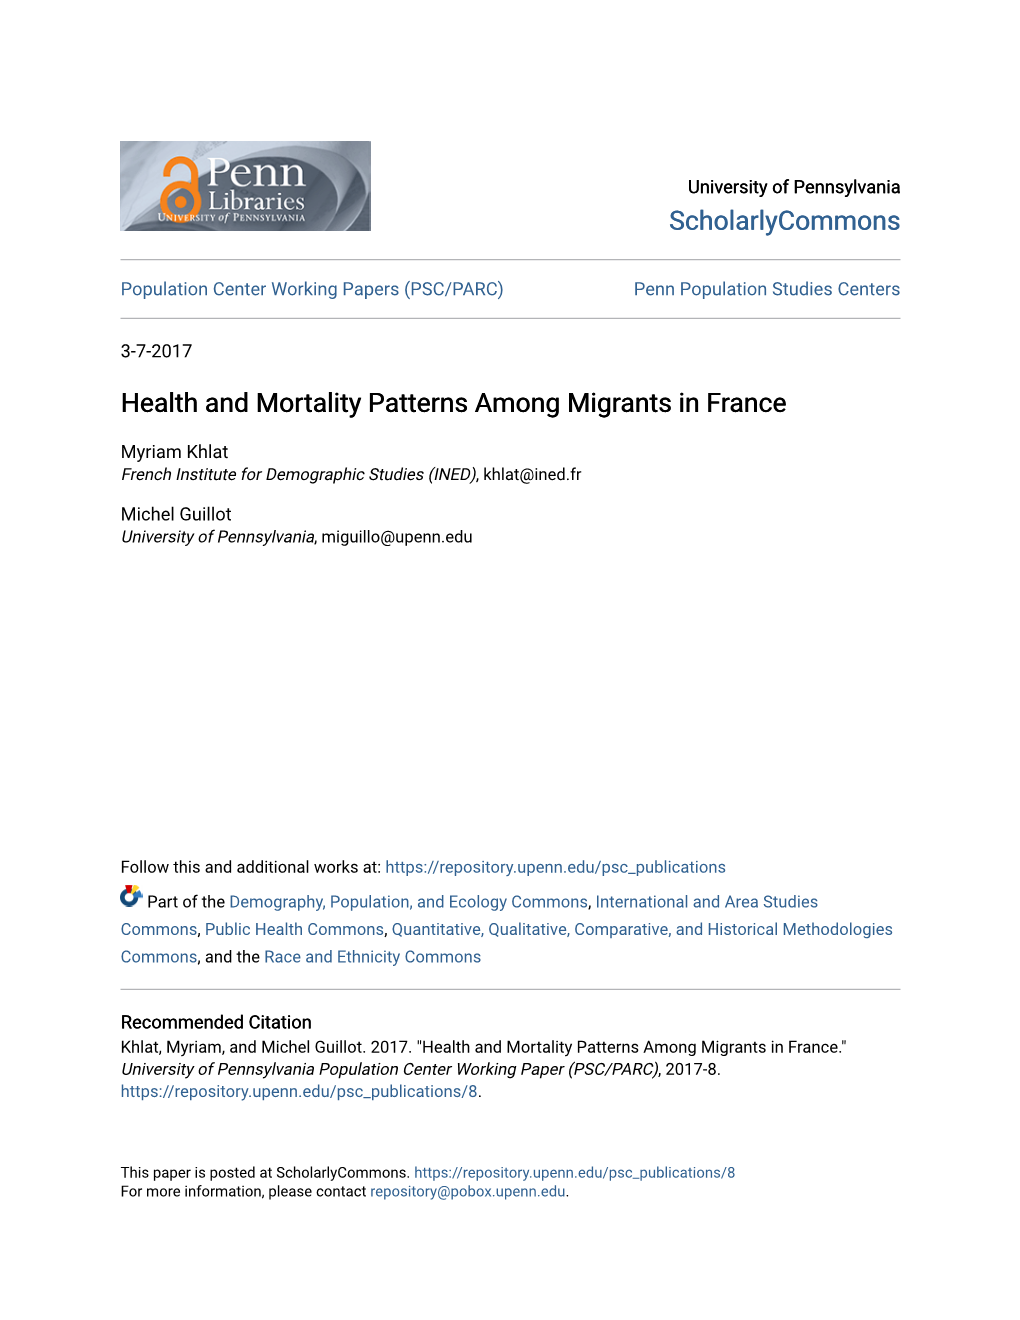 Health and Mortality Patterns Among Migrants in France